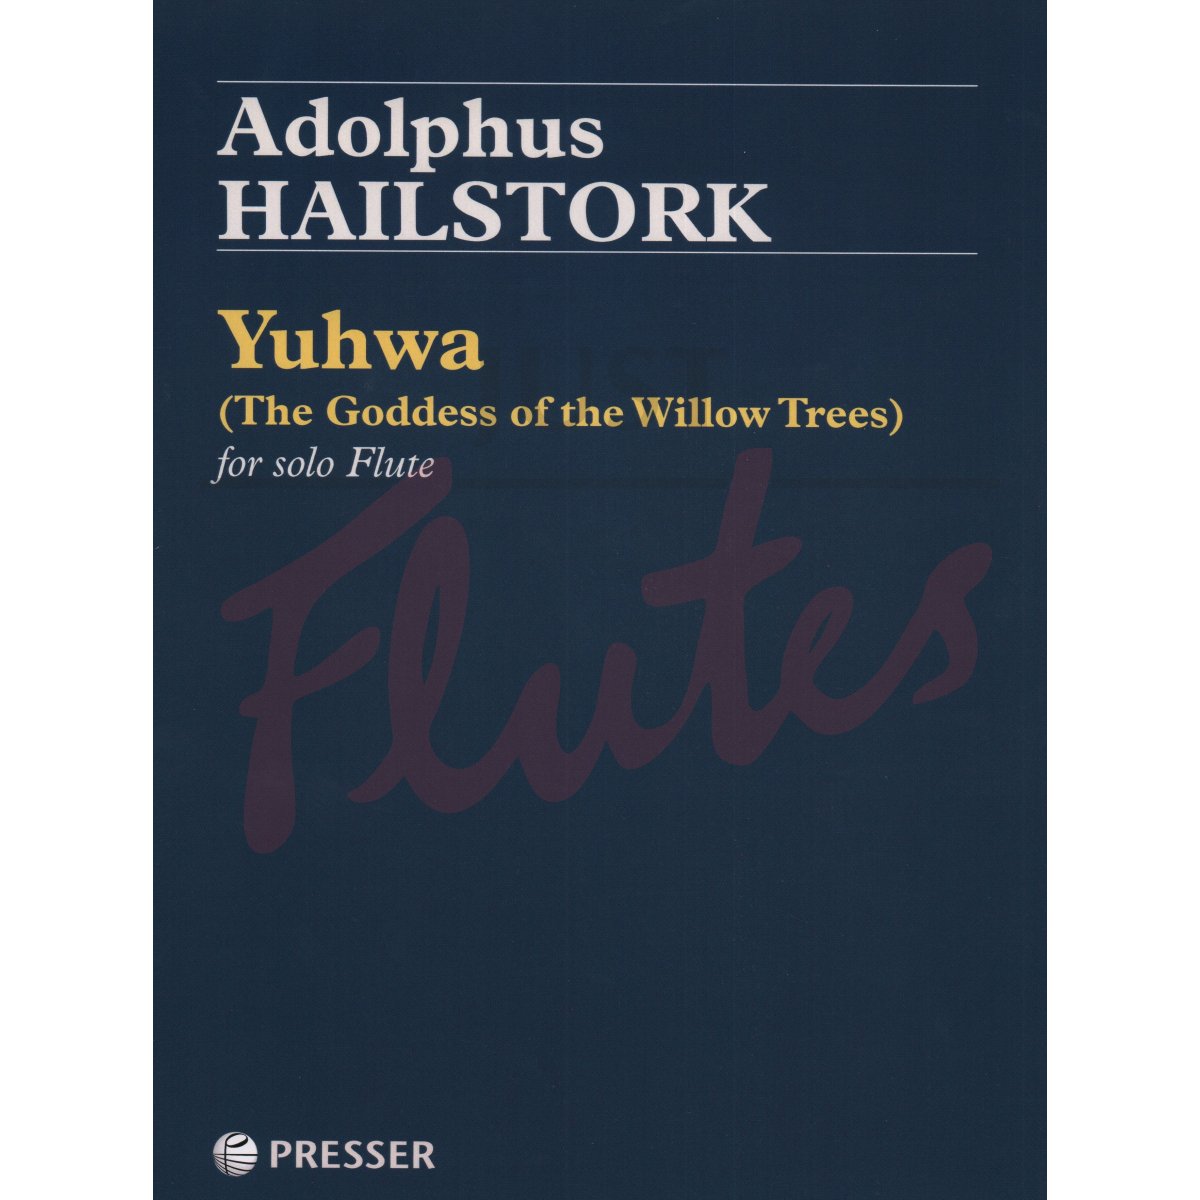 Yuhwa (The Goddess of the Willow Trees) for Solo Flute